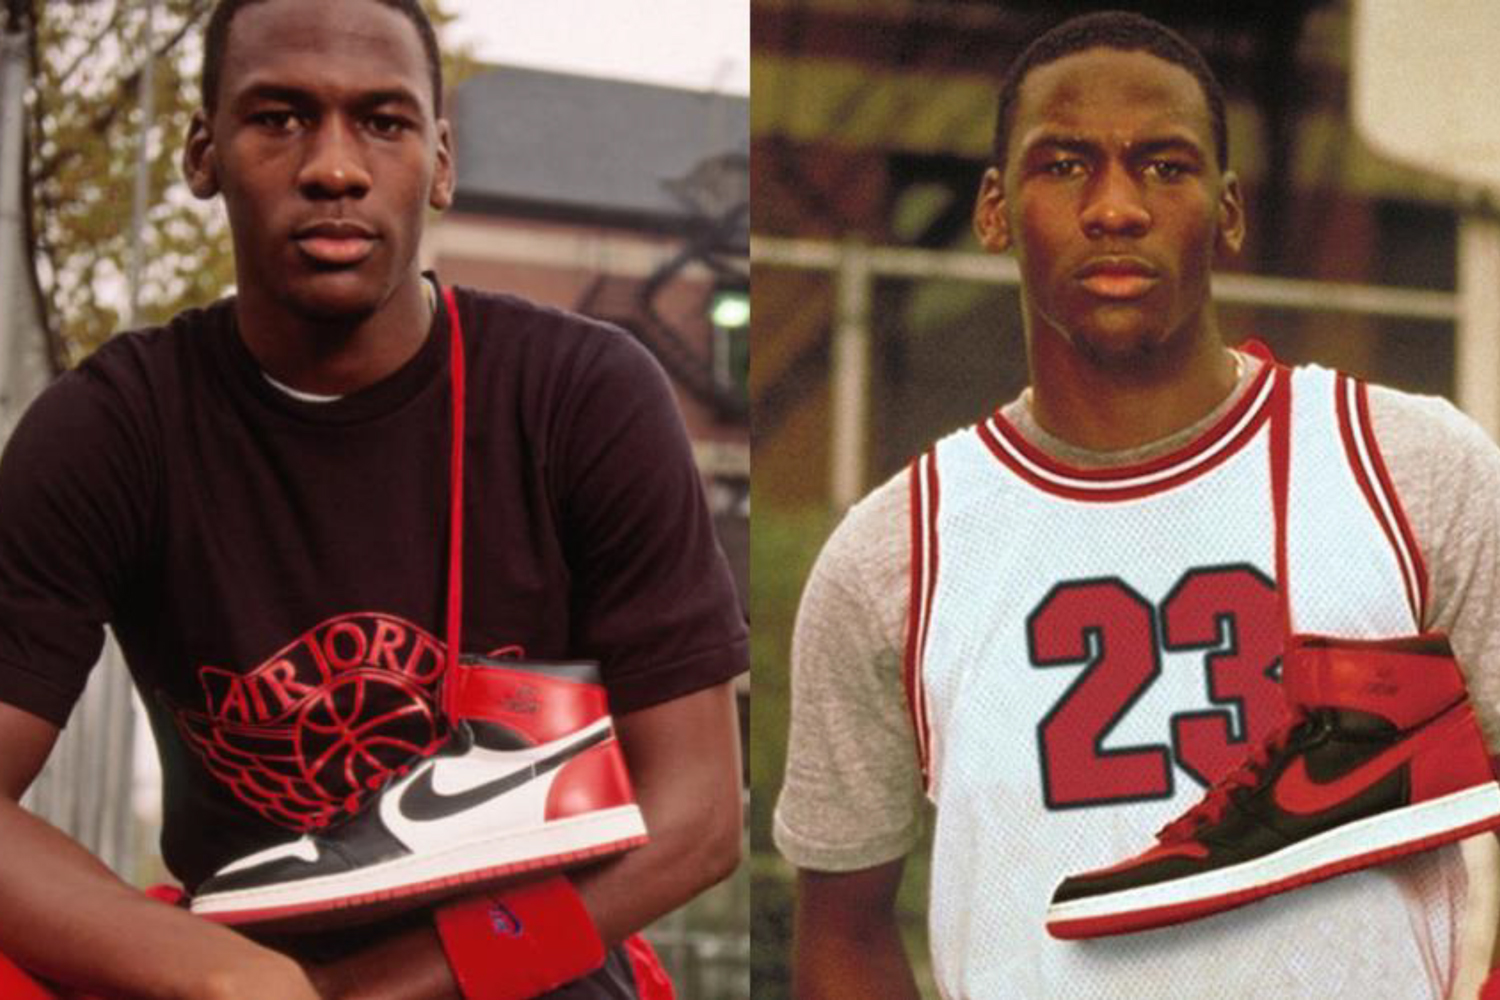 Behind the HYPE: How the Air Jordan 1 Changed the Sneaker Game